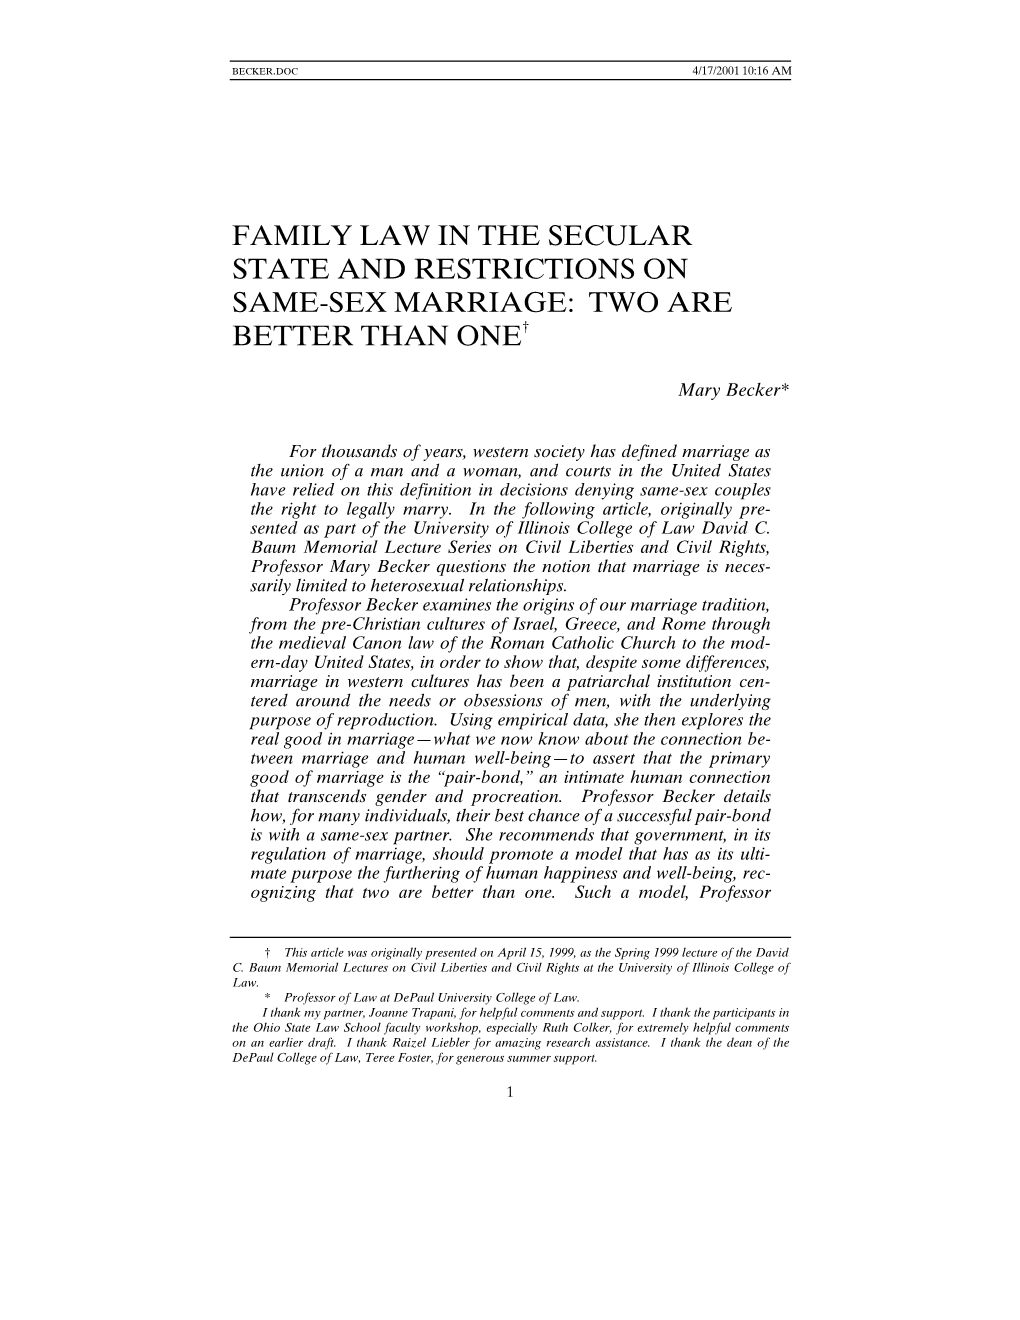 Family Law in the Secular State and Restrictions on Same-Sex Marriage: Two Are Better Than One†